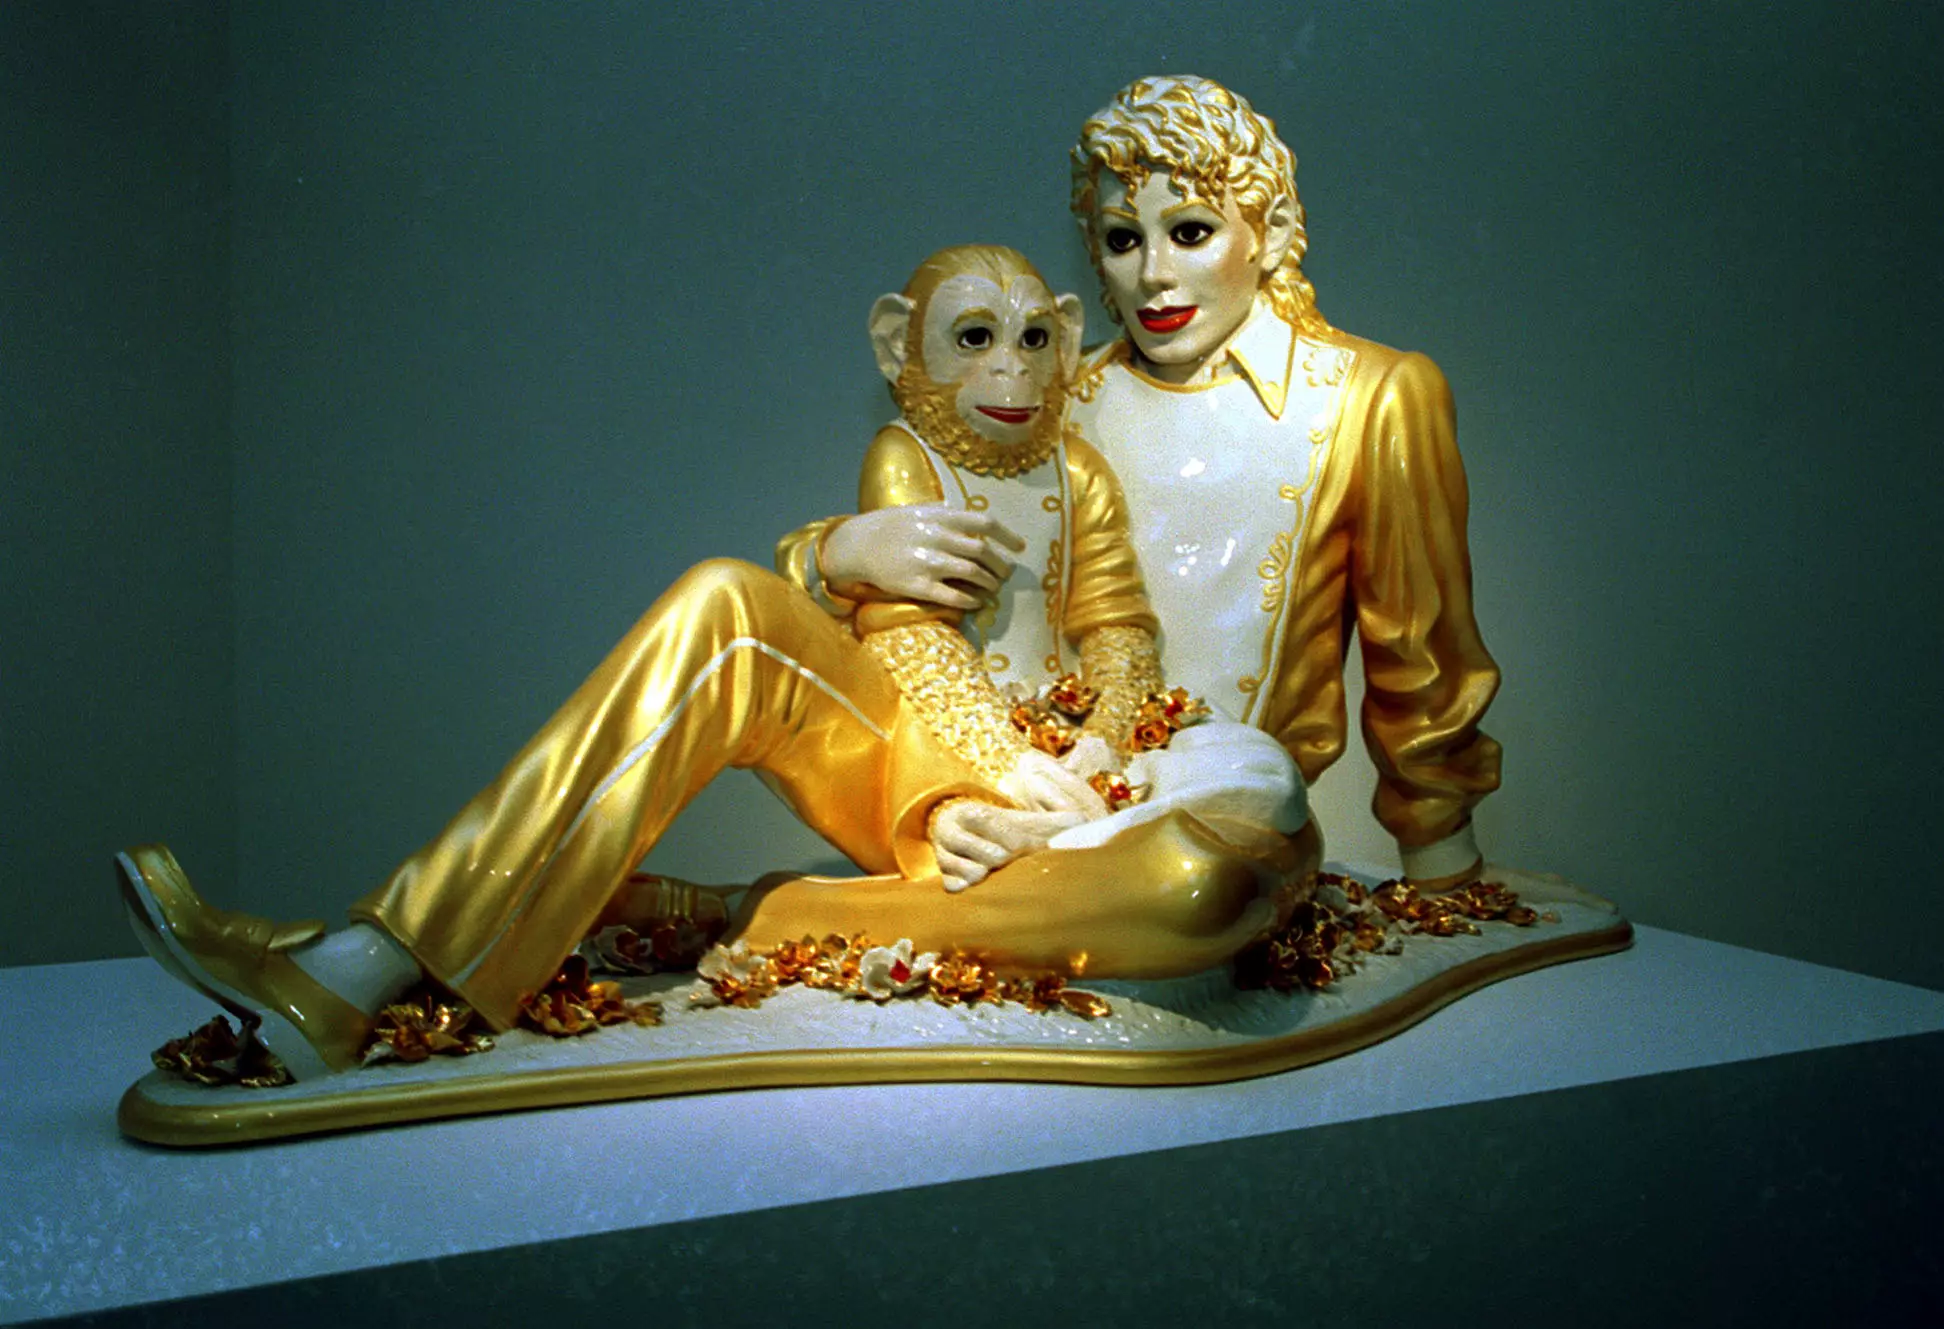 A statue of Jackson and Bubbles that was part of an exhibiton by Jeff Koons.